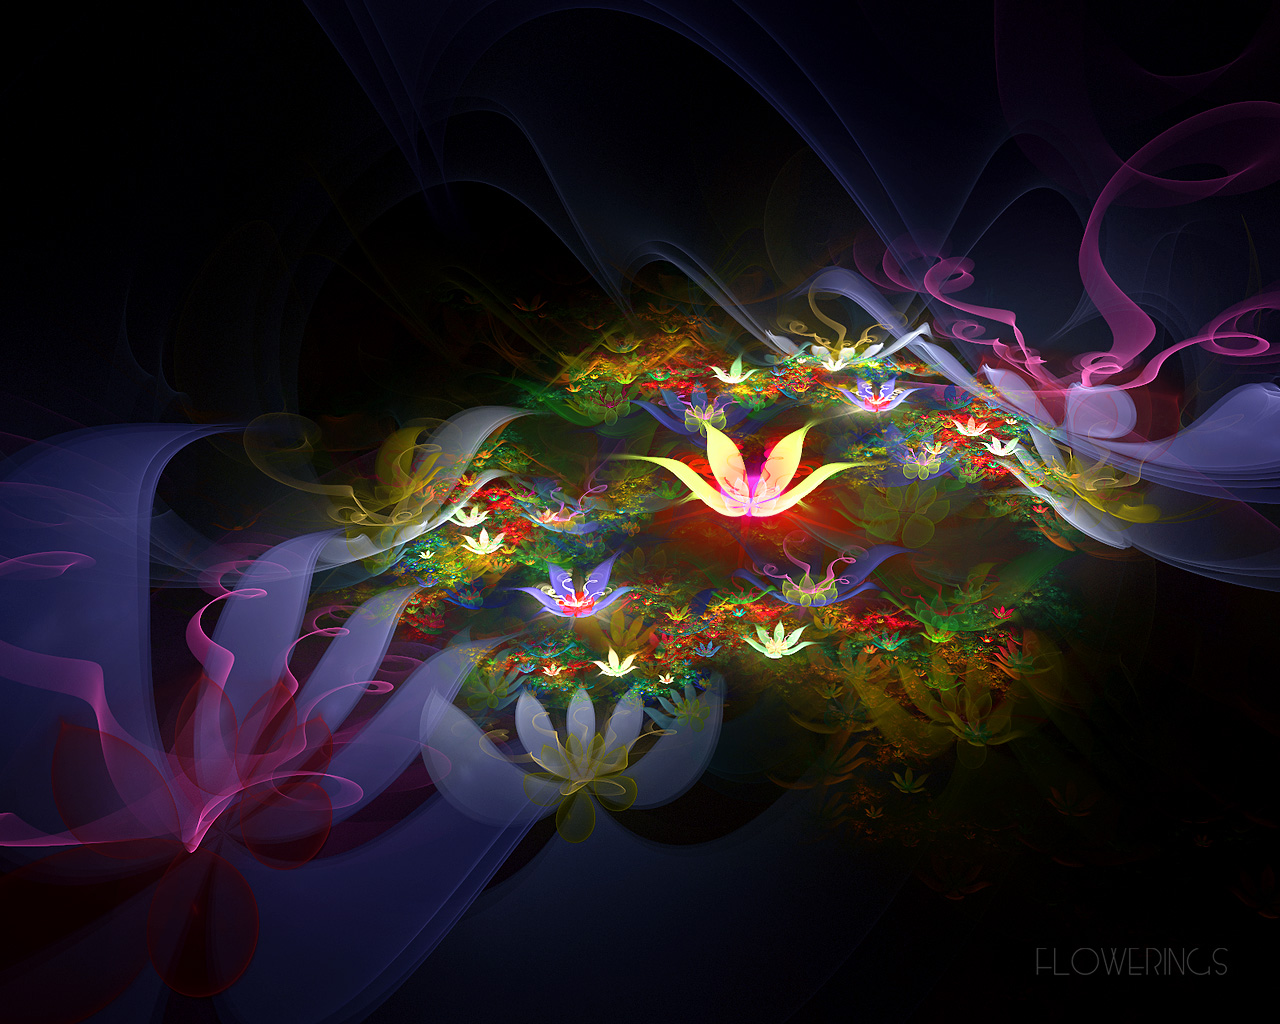 45 amazing 3d wallpapers insite flower 3d free computer wallpapers